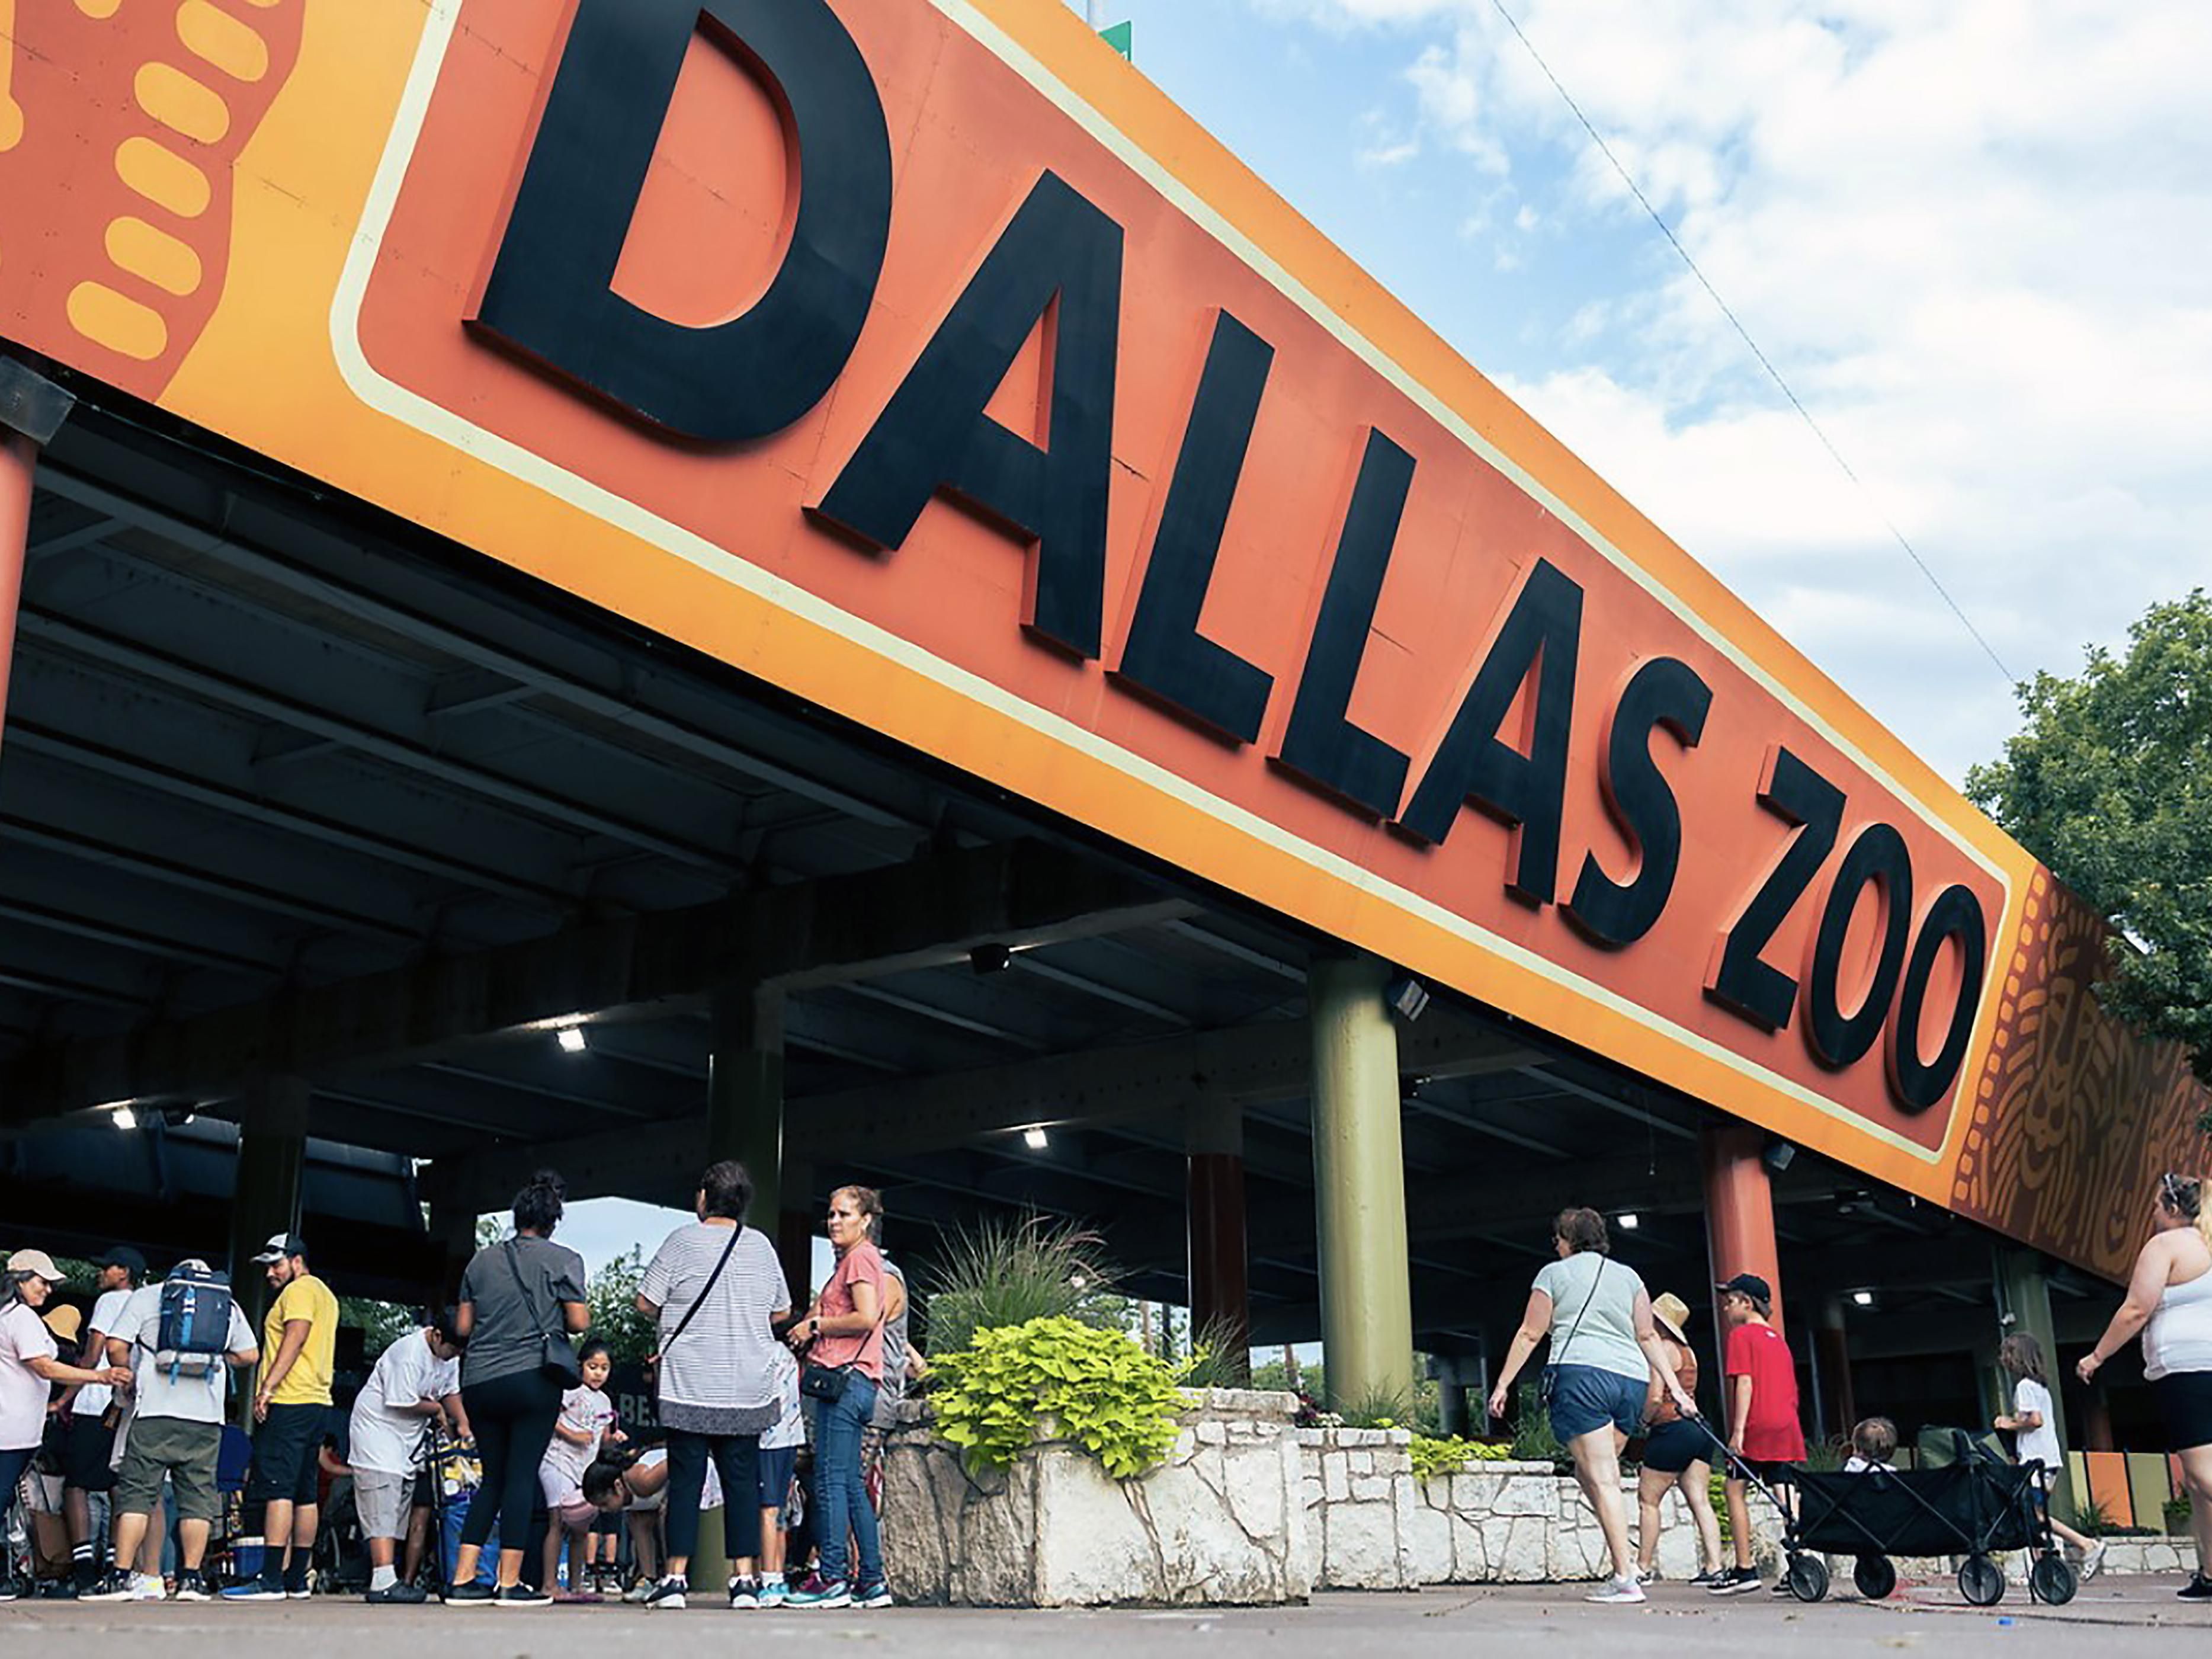 The Dallas Zoo is open 364 days a year! Closed Christmas Day (Dec. 25). The Zoo hours vary based on the season. 